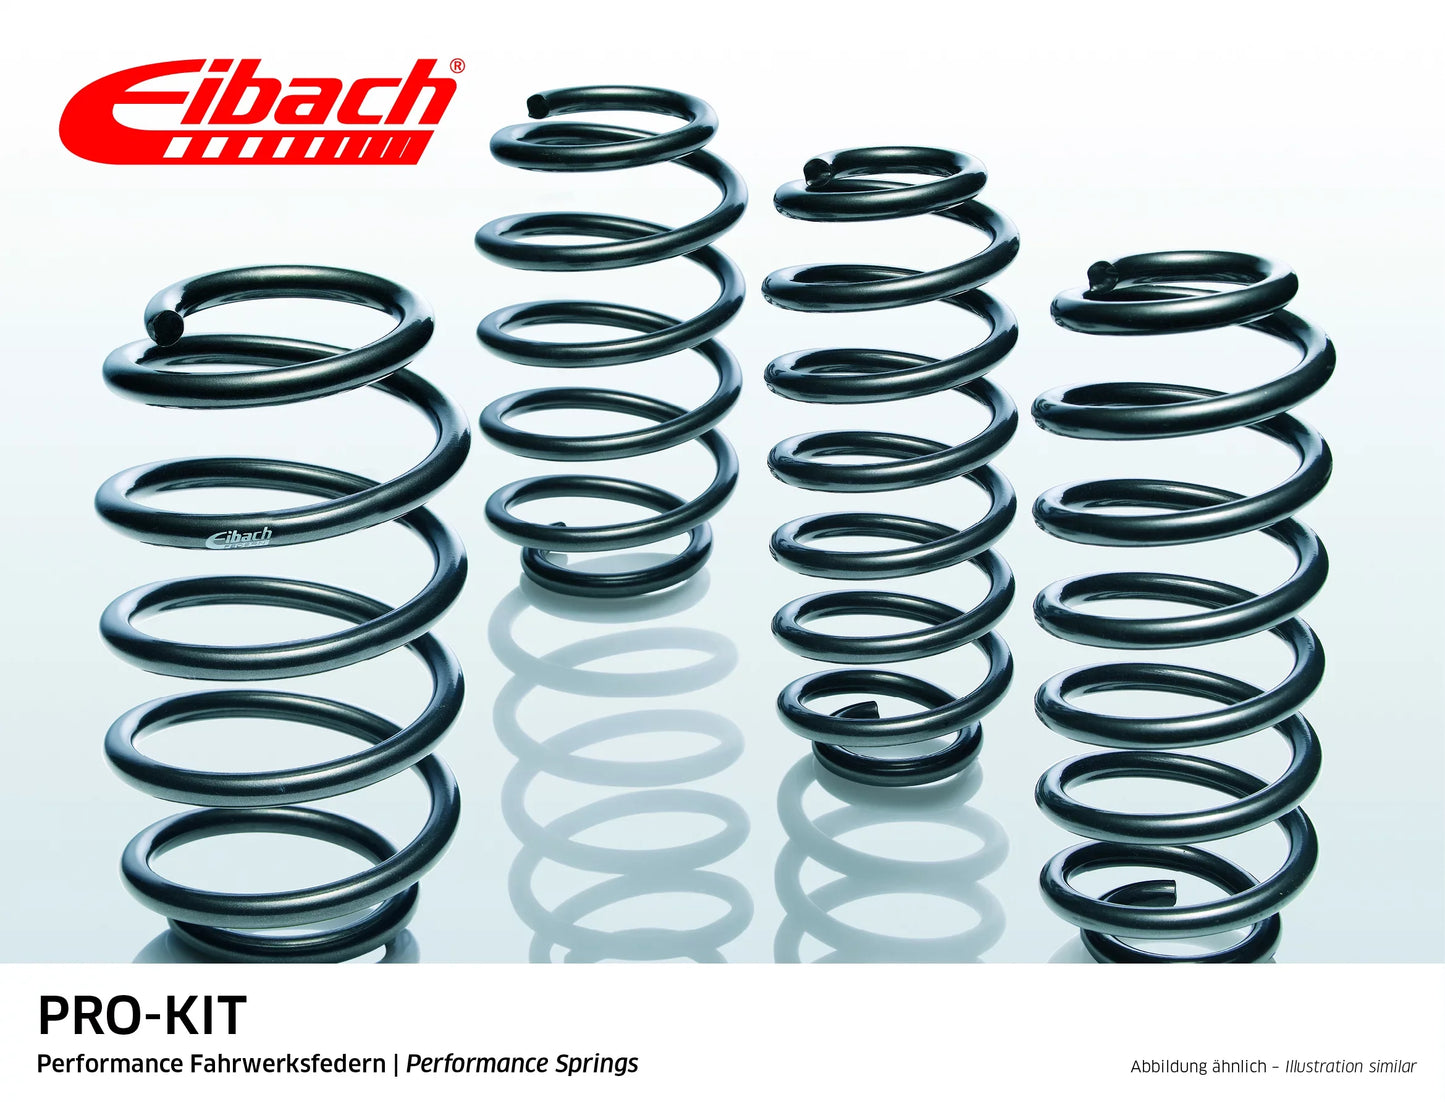 Eibach Pro-Kit Lowering Springs (E10-75-020-03-22) at £251.74